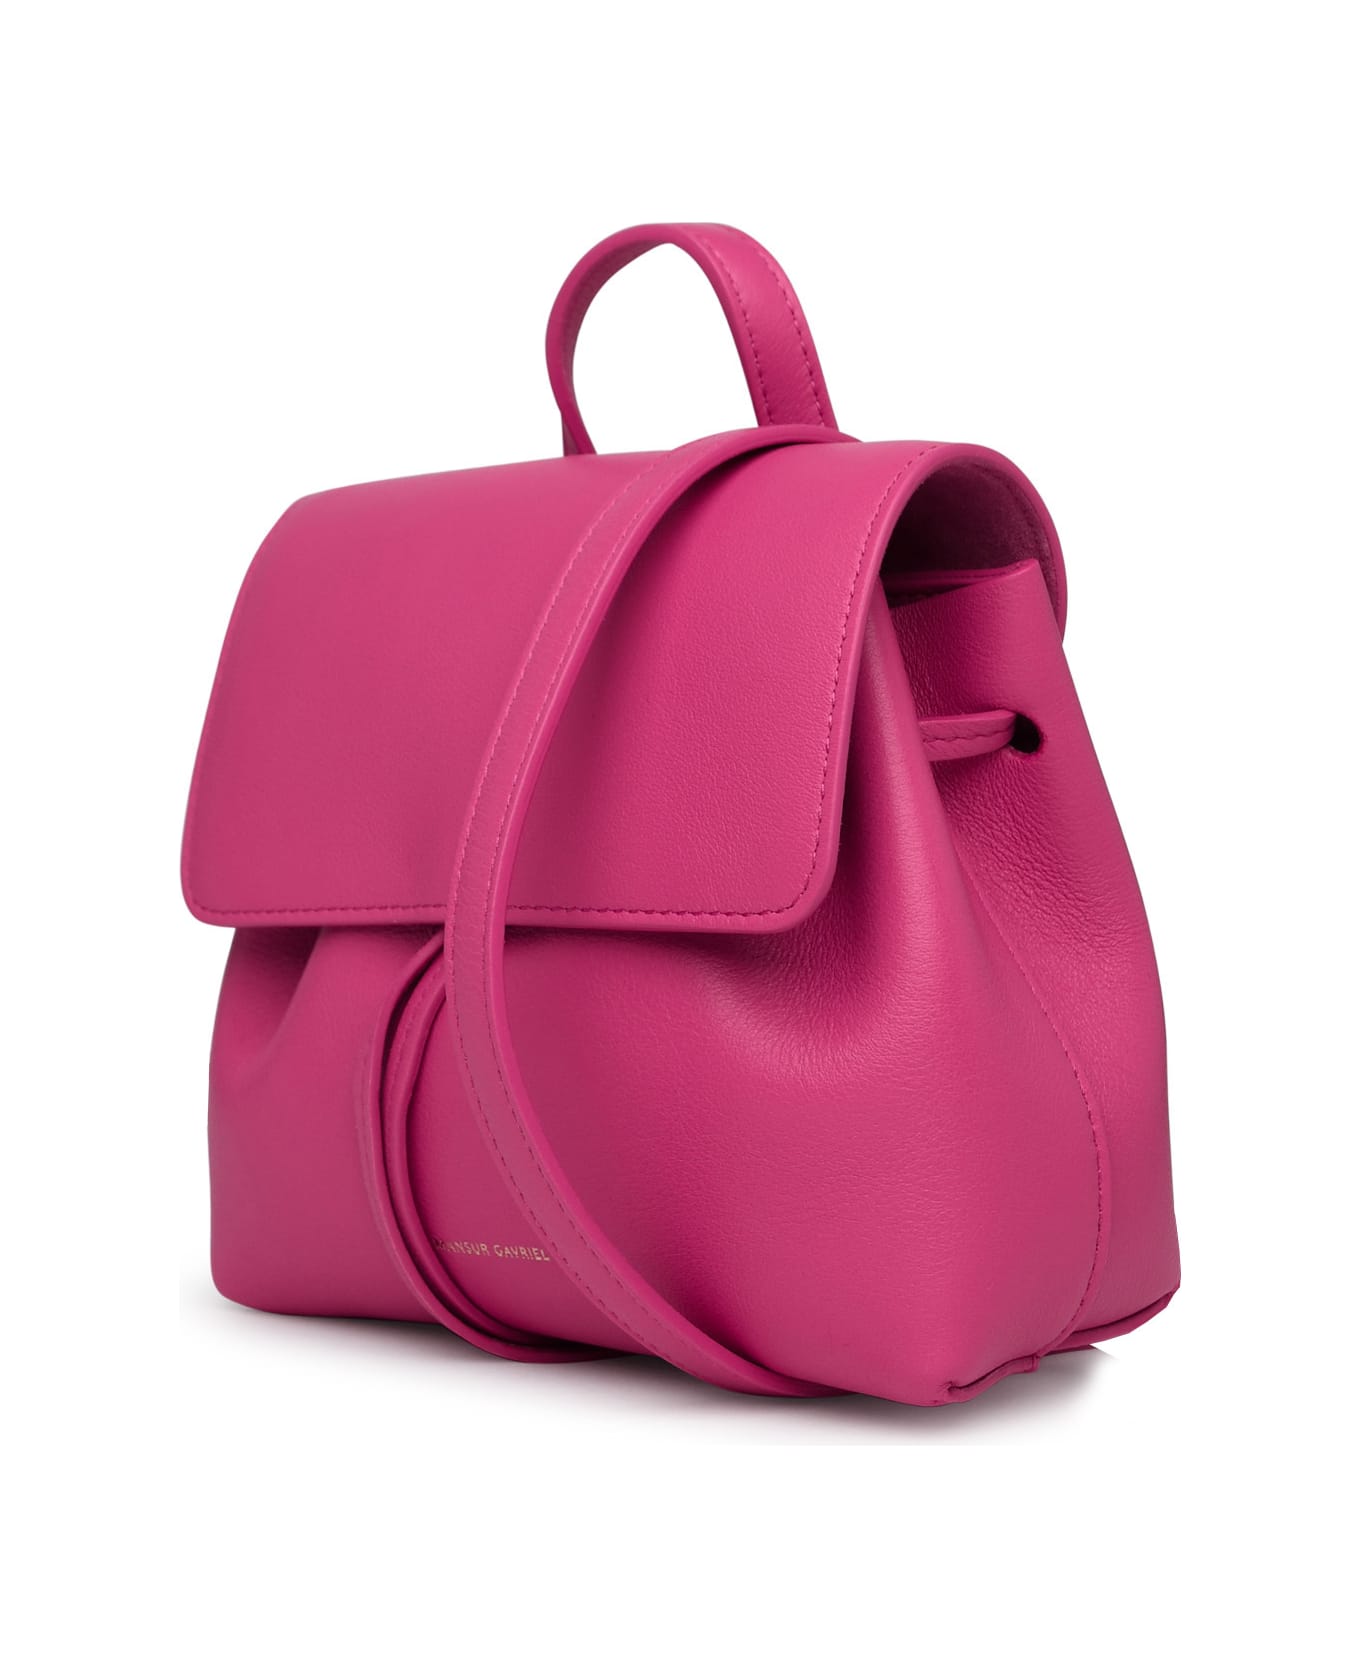 Mansur Gavriel Small 'lady Soft' Bag In Pink Leather - Pink